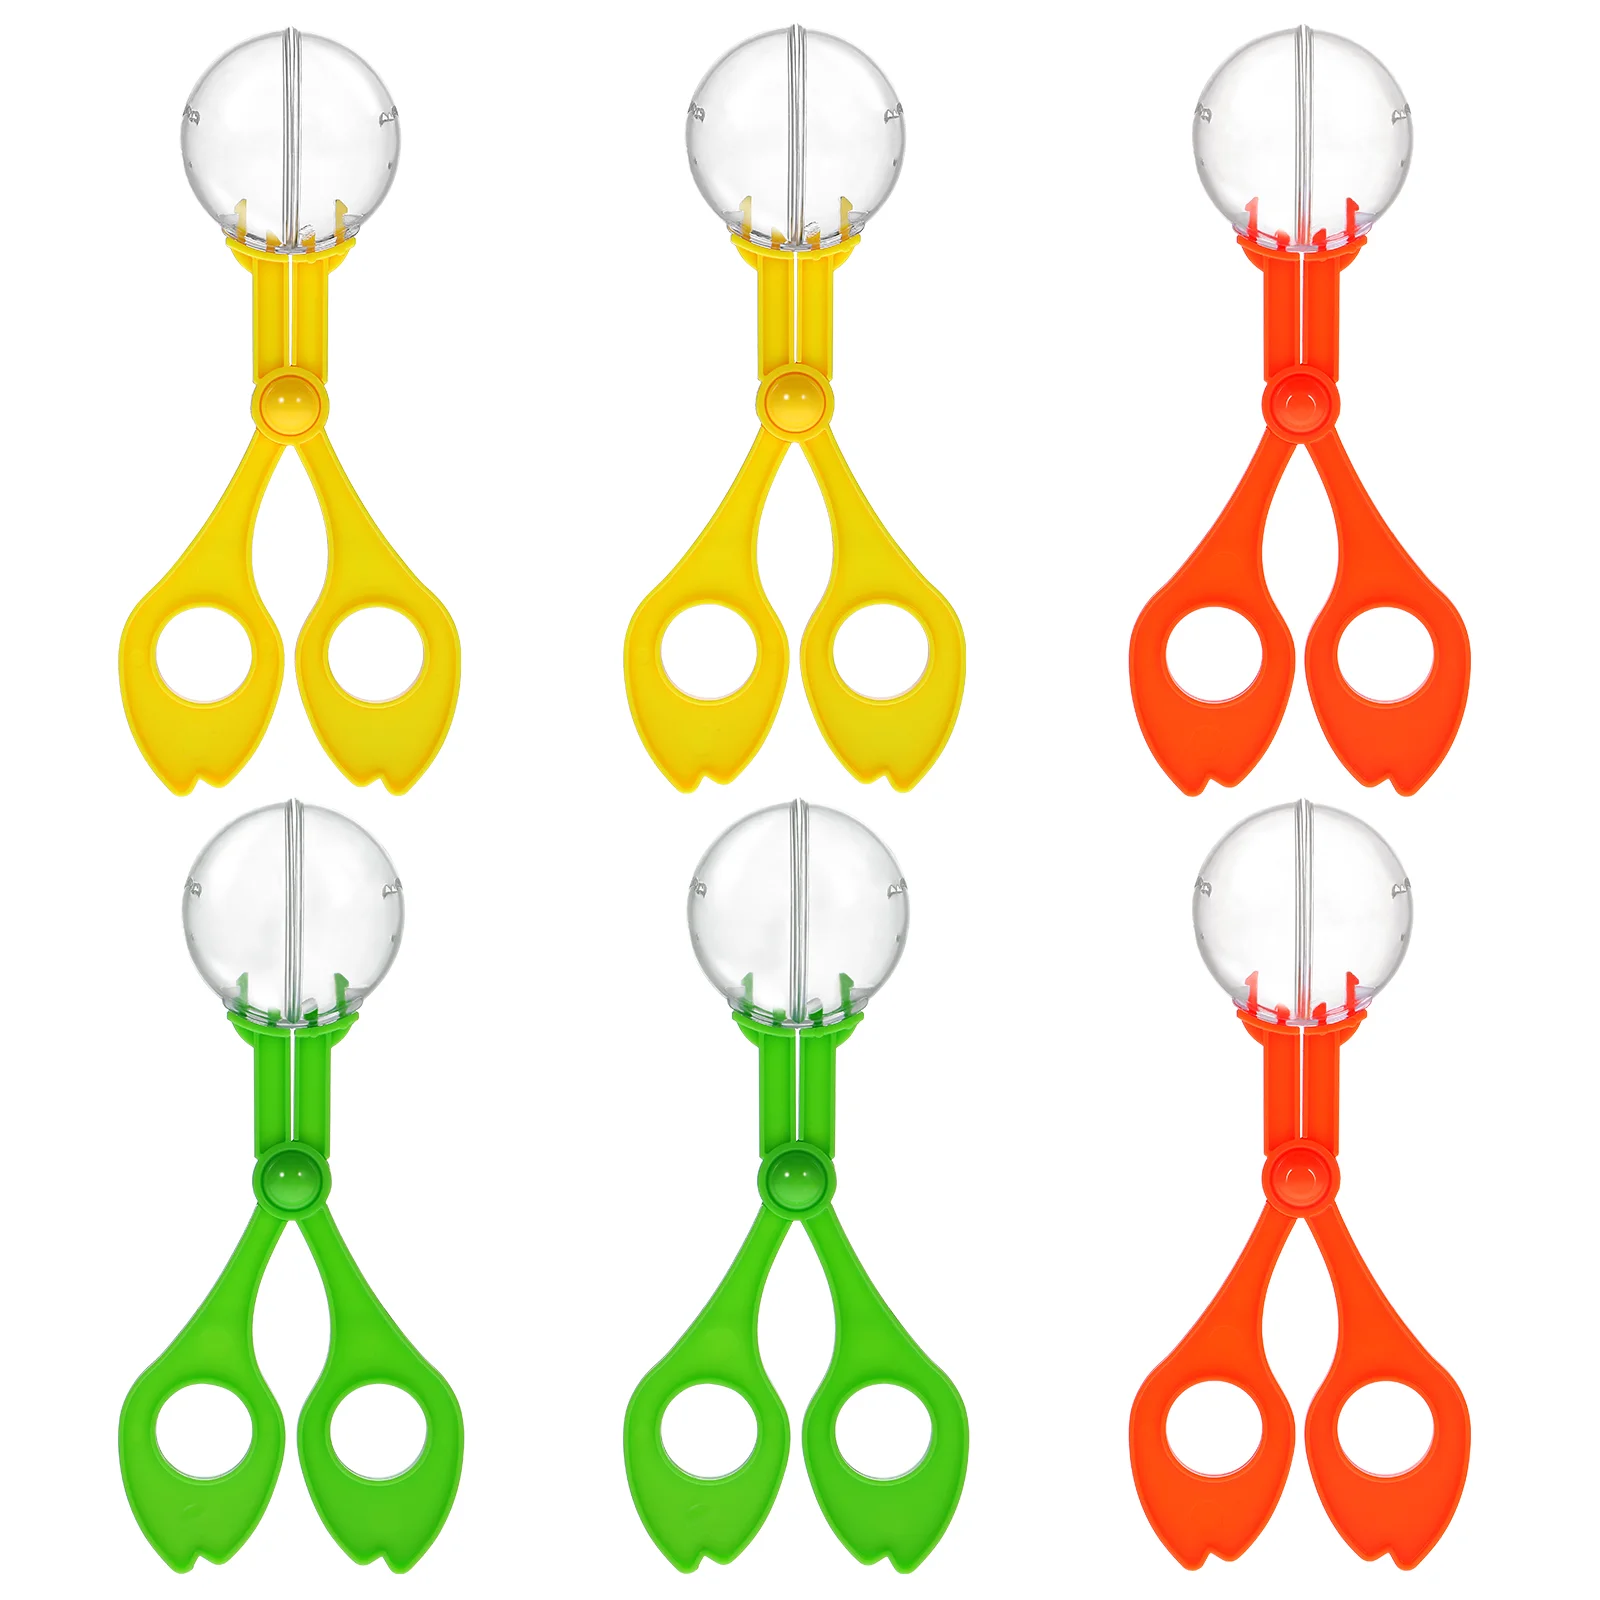 

Bug Catcher Kids Scissors Insect Insects Tweezers Scooper Scoopers Kit Catch Catching Toys Handy Set Educational Collection Tool